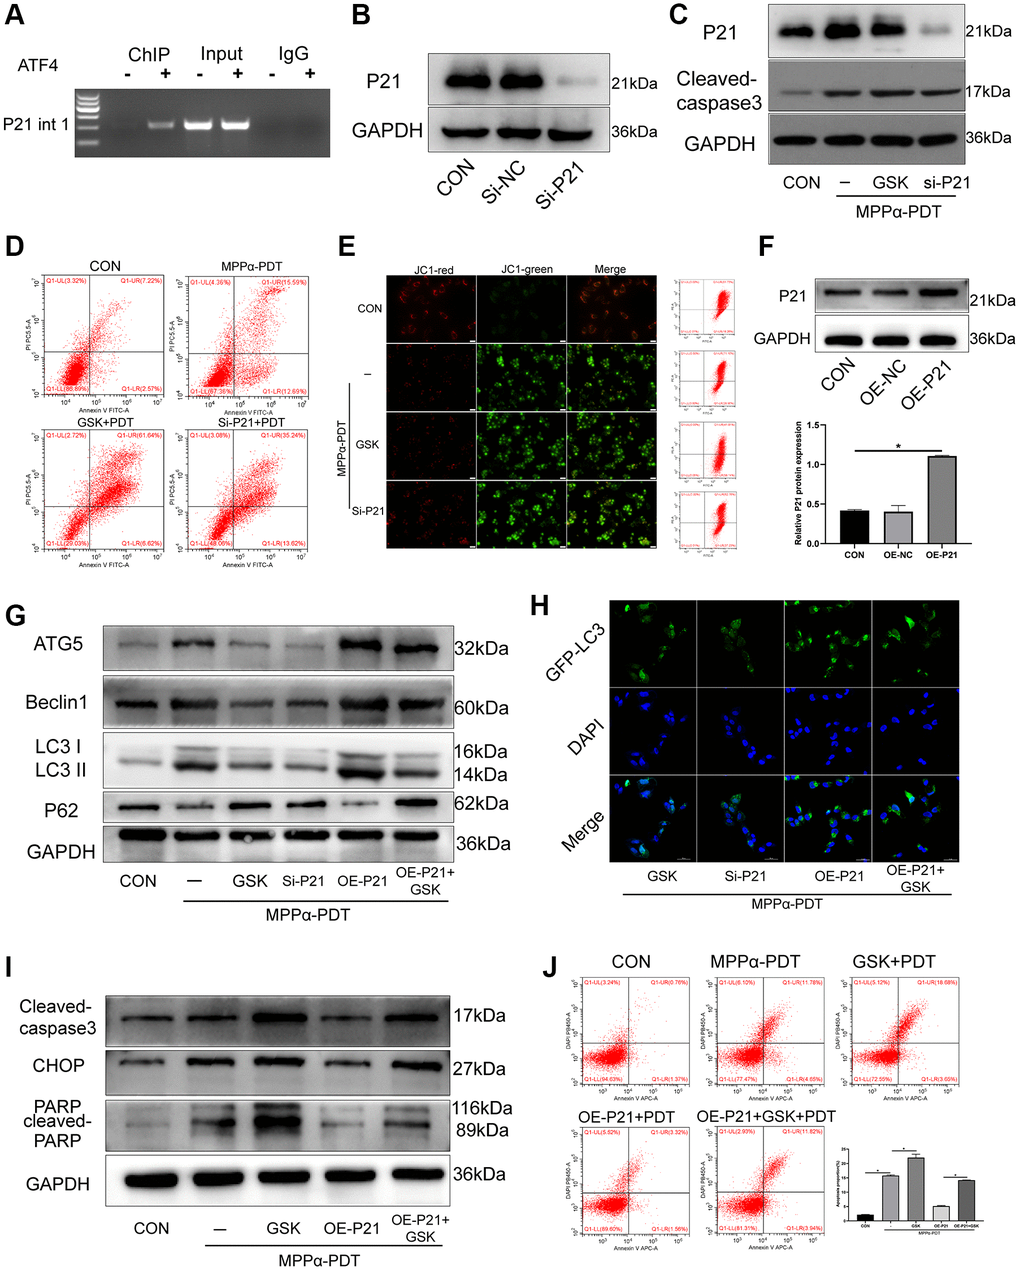 The pro-survival effect of P21 is achieved by regulating autophagy after MPPα-PDT. (A) ChIP analysis was used to detect ATF4 binding to the first intron of p21. HOS cells were transfected with siRNAs and then treated with MPPα-PDT. (B) Protein P21 were detected by western blot to represent the transfection efficiency. (C) Following indicated treatments, cells were harvested and P21 and cleaved caspase-3 levels were determined by western blot. (D, E) Apoptotic rate or JC-1 stain were examined by flow cytometry or fluorescence microscope (×200). (F) Protein P21 was detected by western blot after transfected by lentivirus-overexpress P21. (G) Following indicated treatments, cells were harvested and LC3, P62, Atg5 and Beclin1 levels were determined by western blot. (H) Adenovirus-GFP-LC3 was transfected into the HOS cells after treated, the LC3 fluorescent particles were observed by laser confocal microscope (×400). (I) Protein CHOP, cleaved-caspase3 were detected by western blot. (J) Apoptotic rate was examined by flow cytometry. *P 